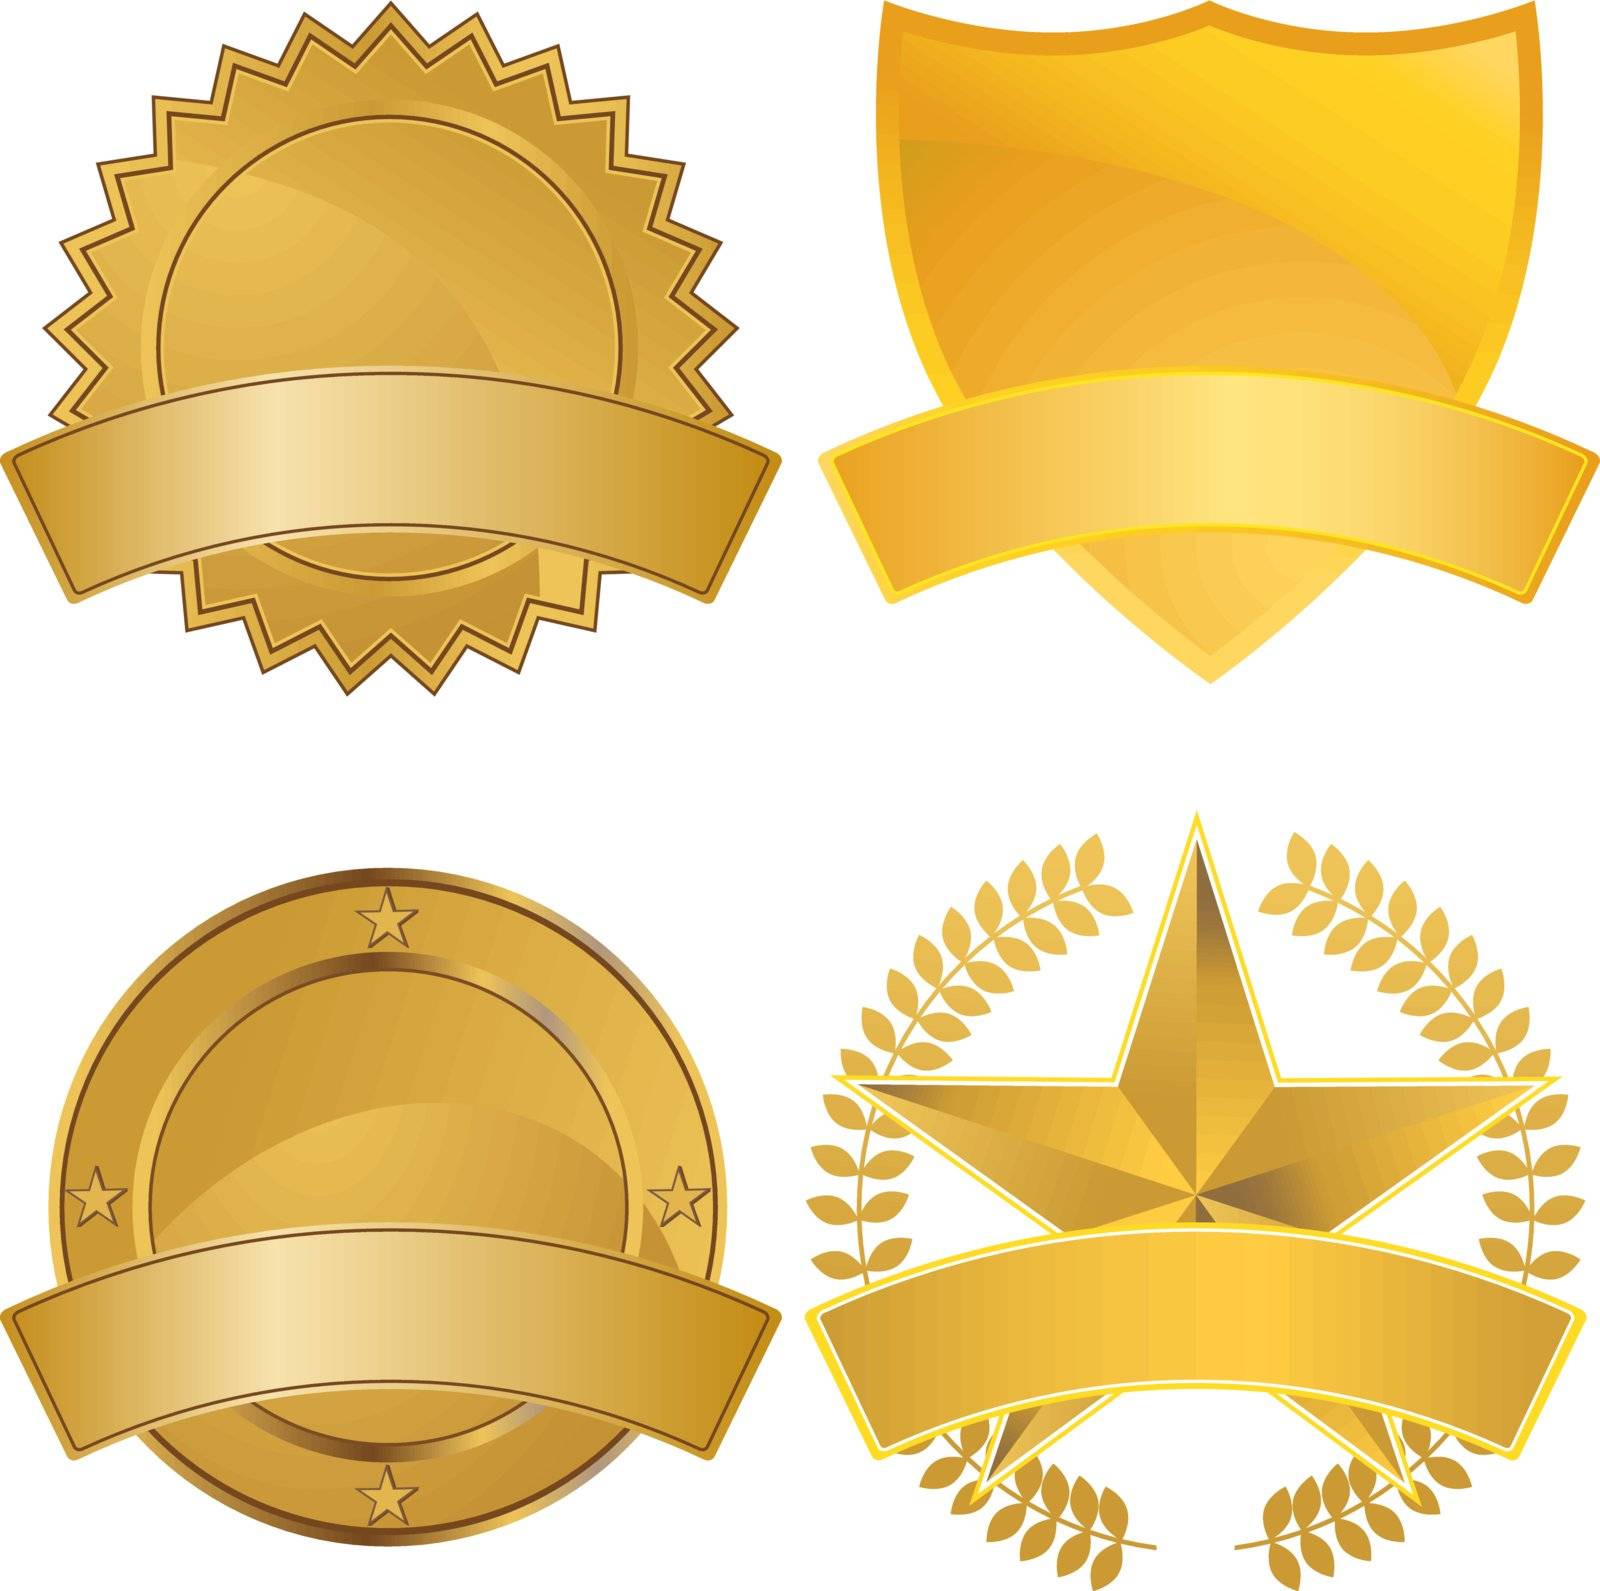 Gold Award Medals by cteconsulting